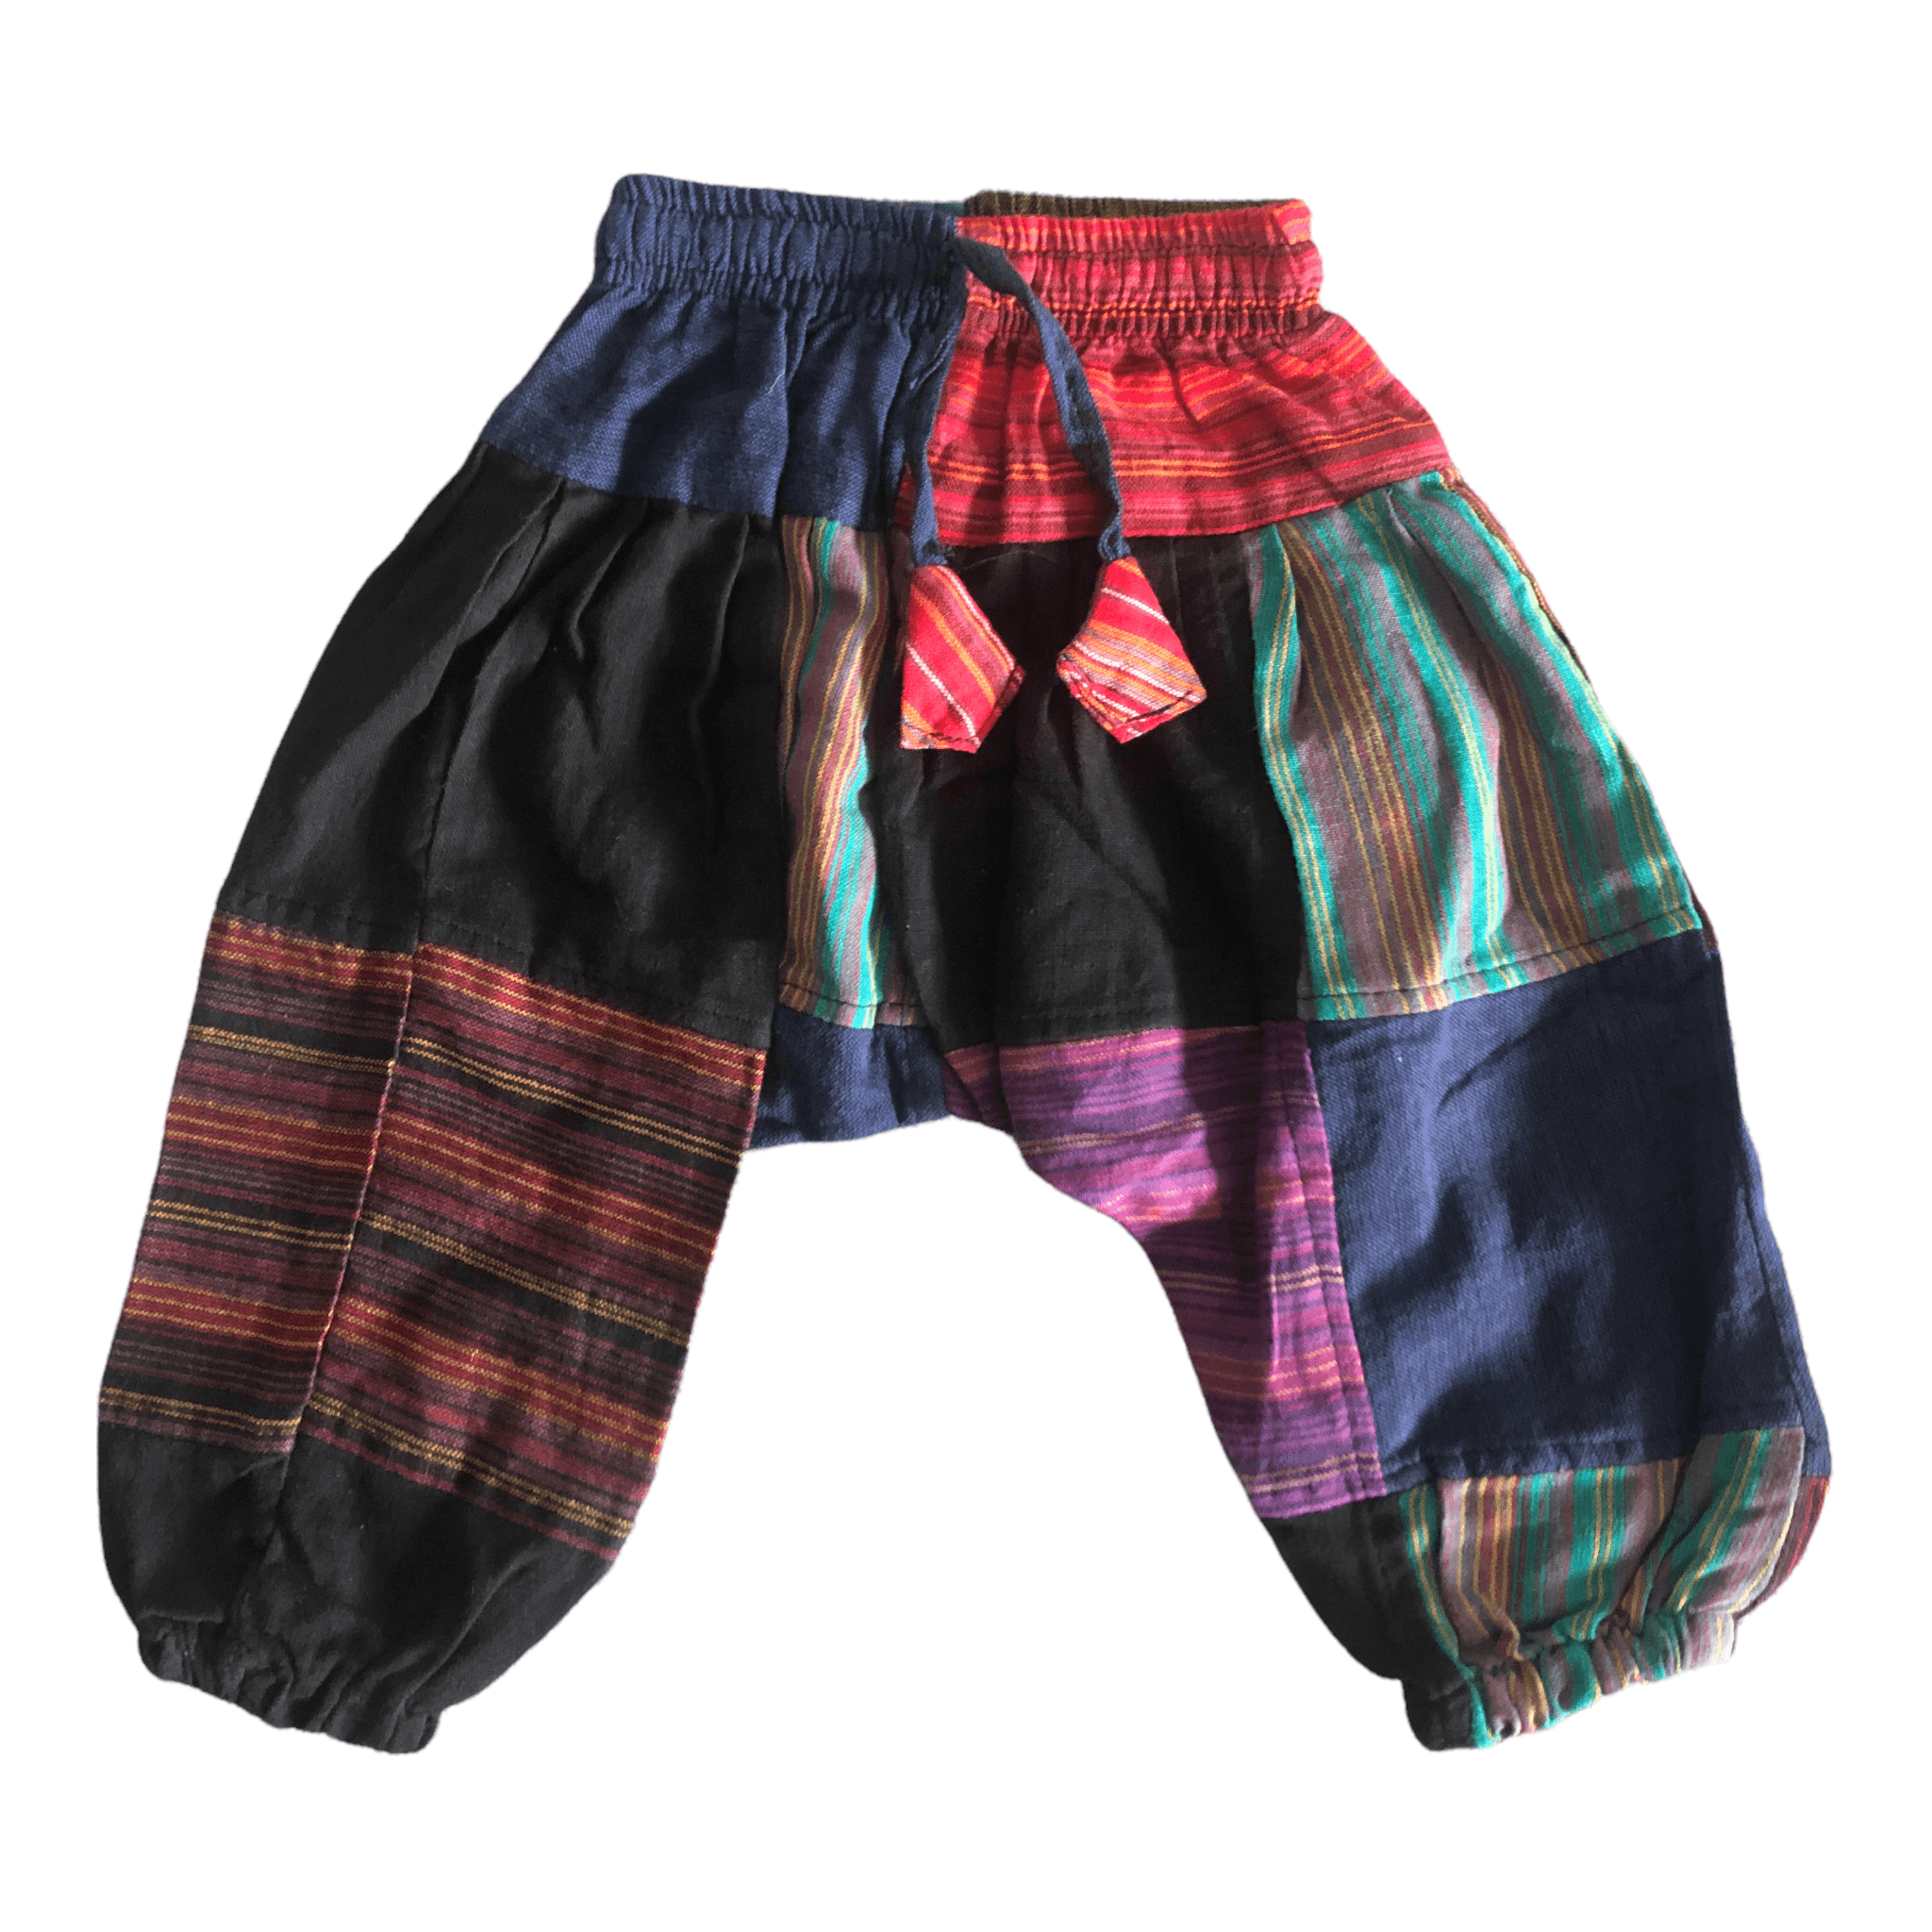 Pre-Owned Nepali Fairtrade Multicoloured Patchwork Harem Pants (Age 3-4) The Re-Generation